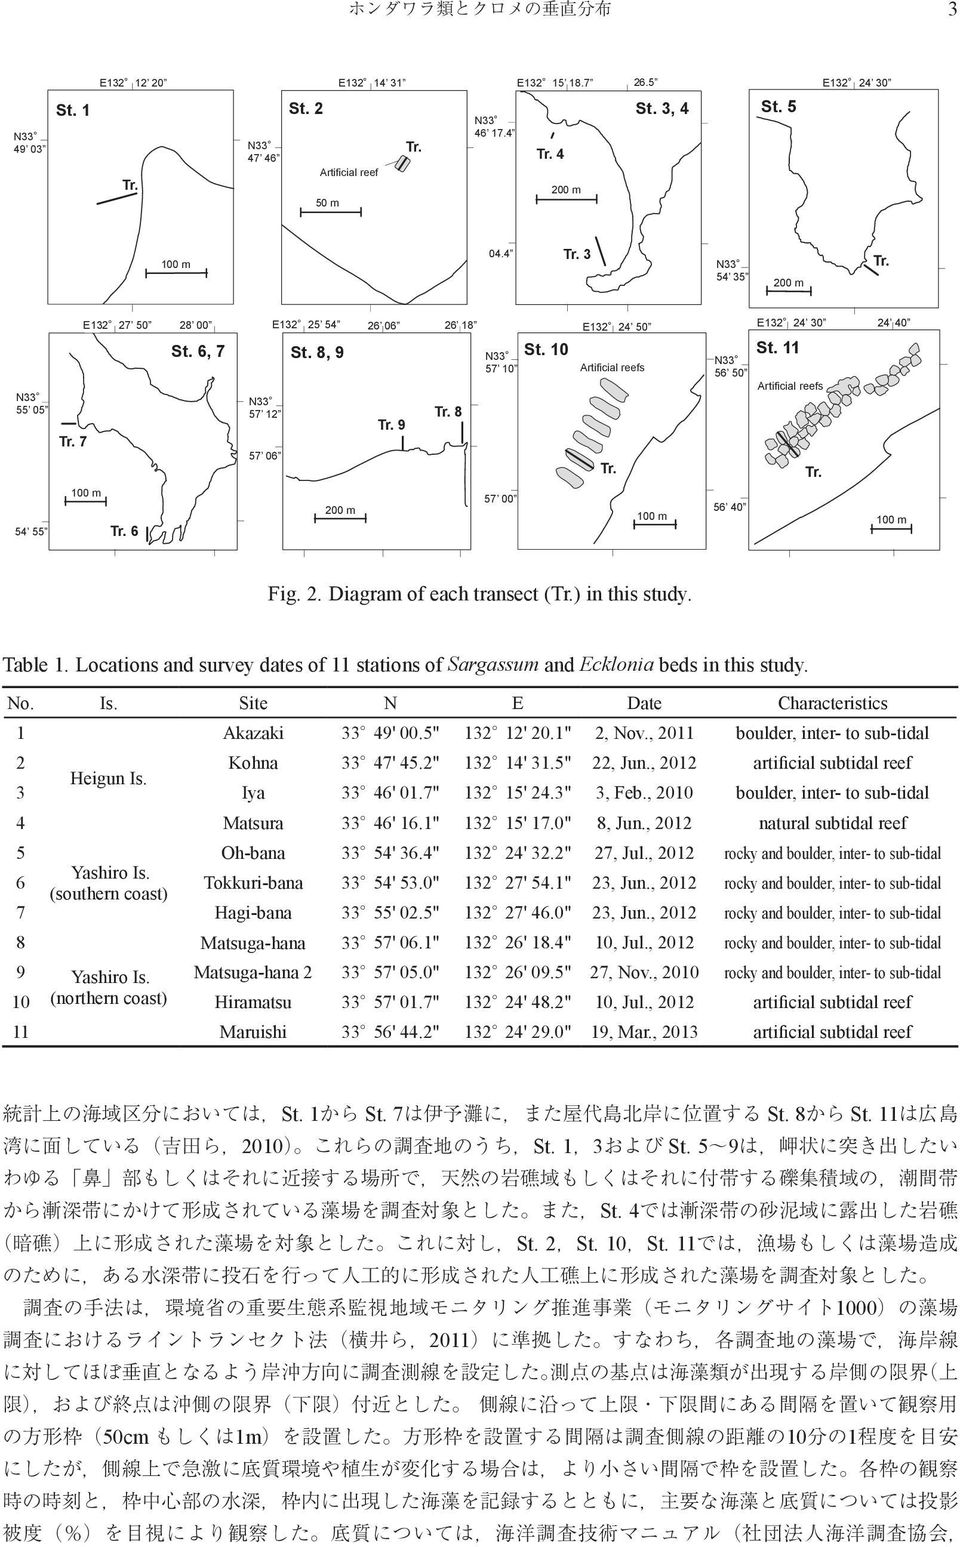 . Diagram of each transect (Tr.) in this study. Fig. Table 1. Locations and survey dates of 11 stations of Sargassum and Ecklonia beds in this study. No. Is.